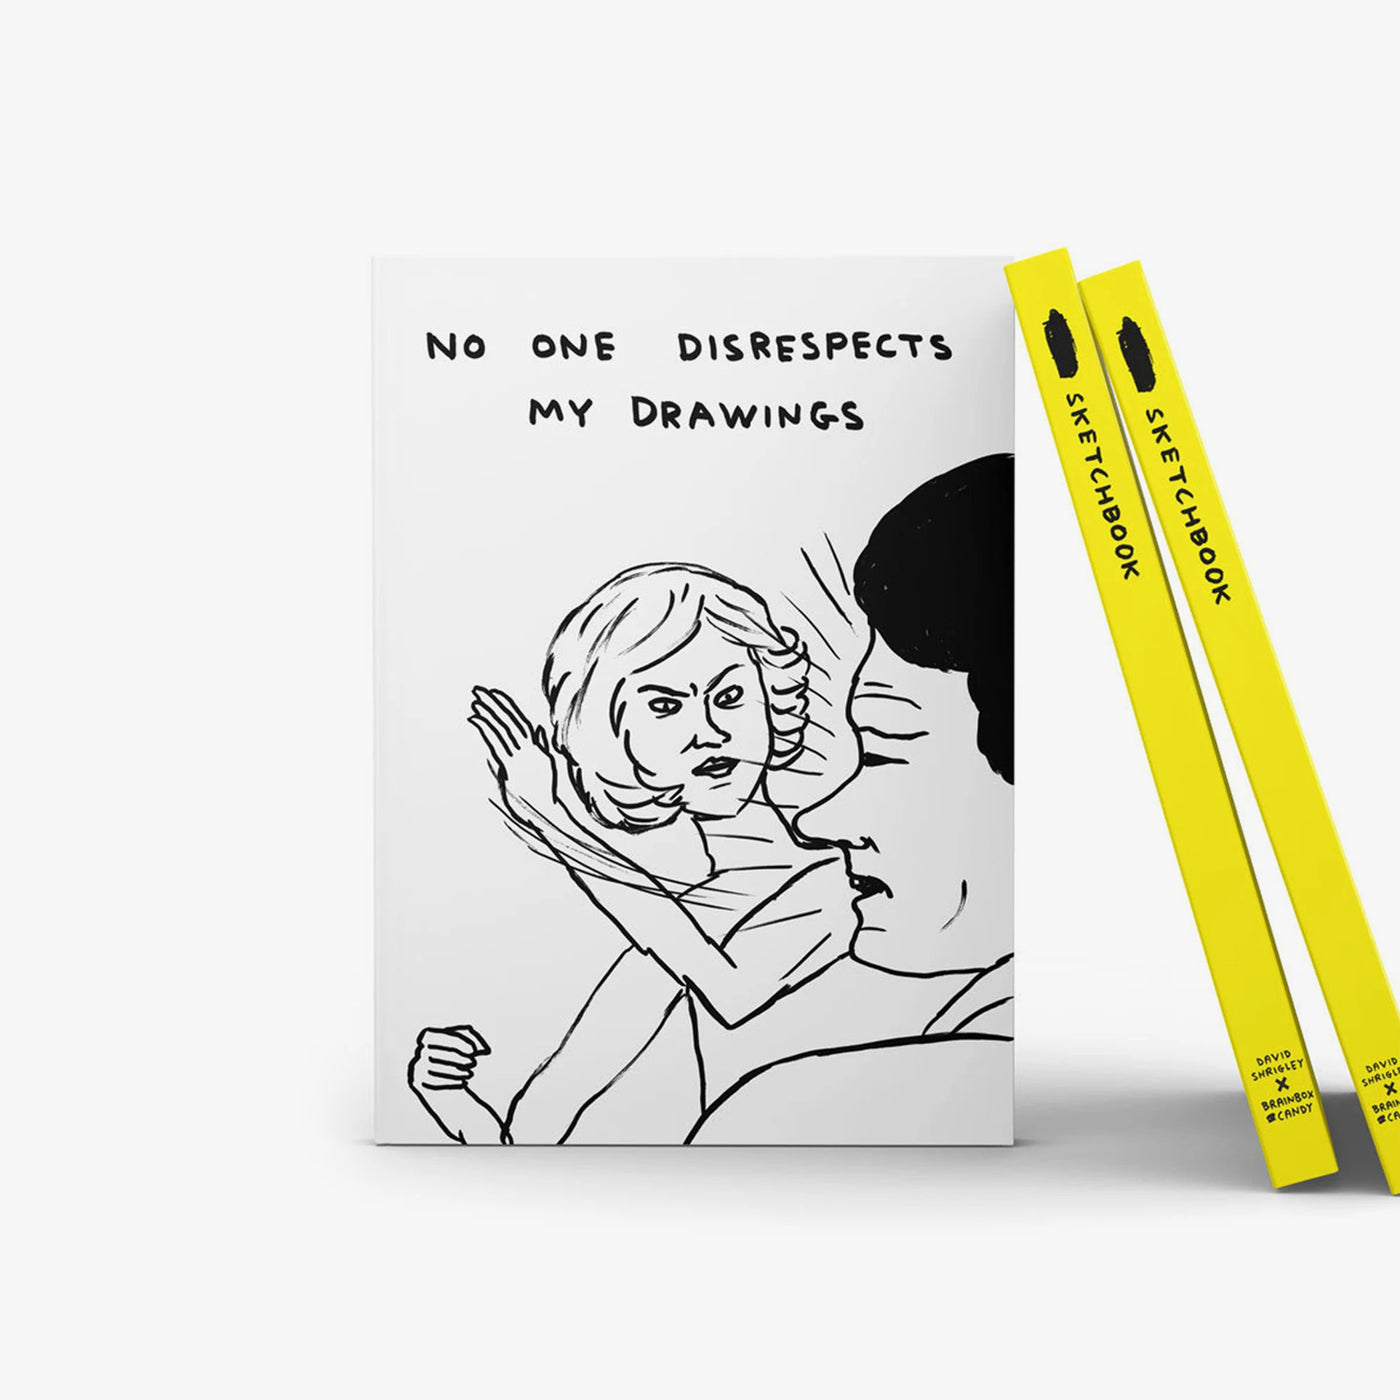 David Shrigley - Sketchbook "No One Disrespects My Drawings"